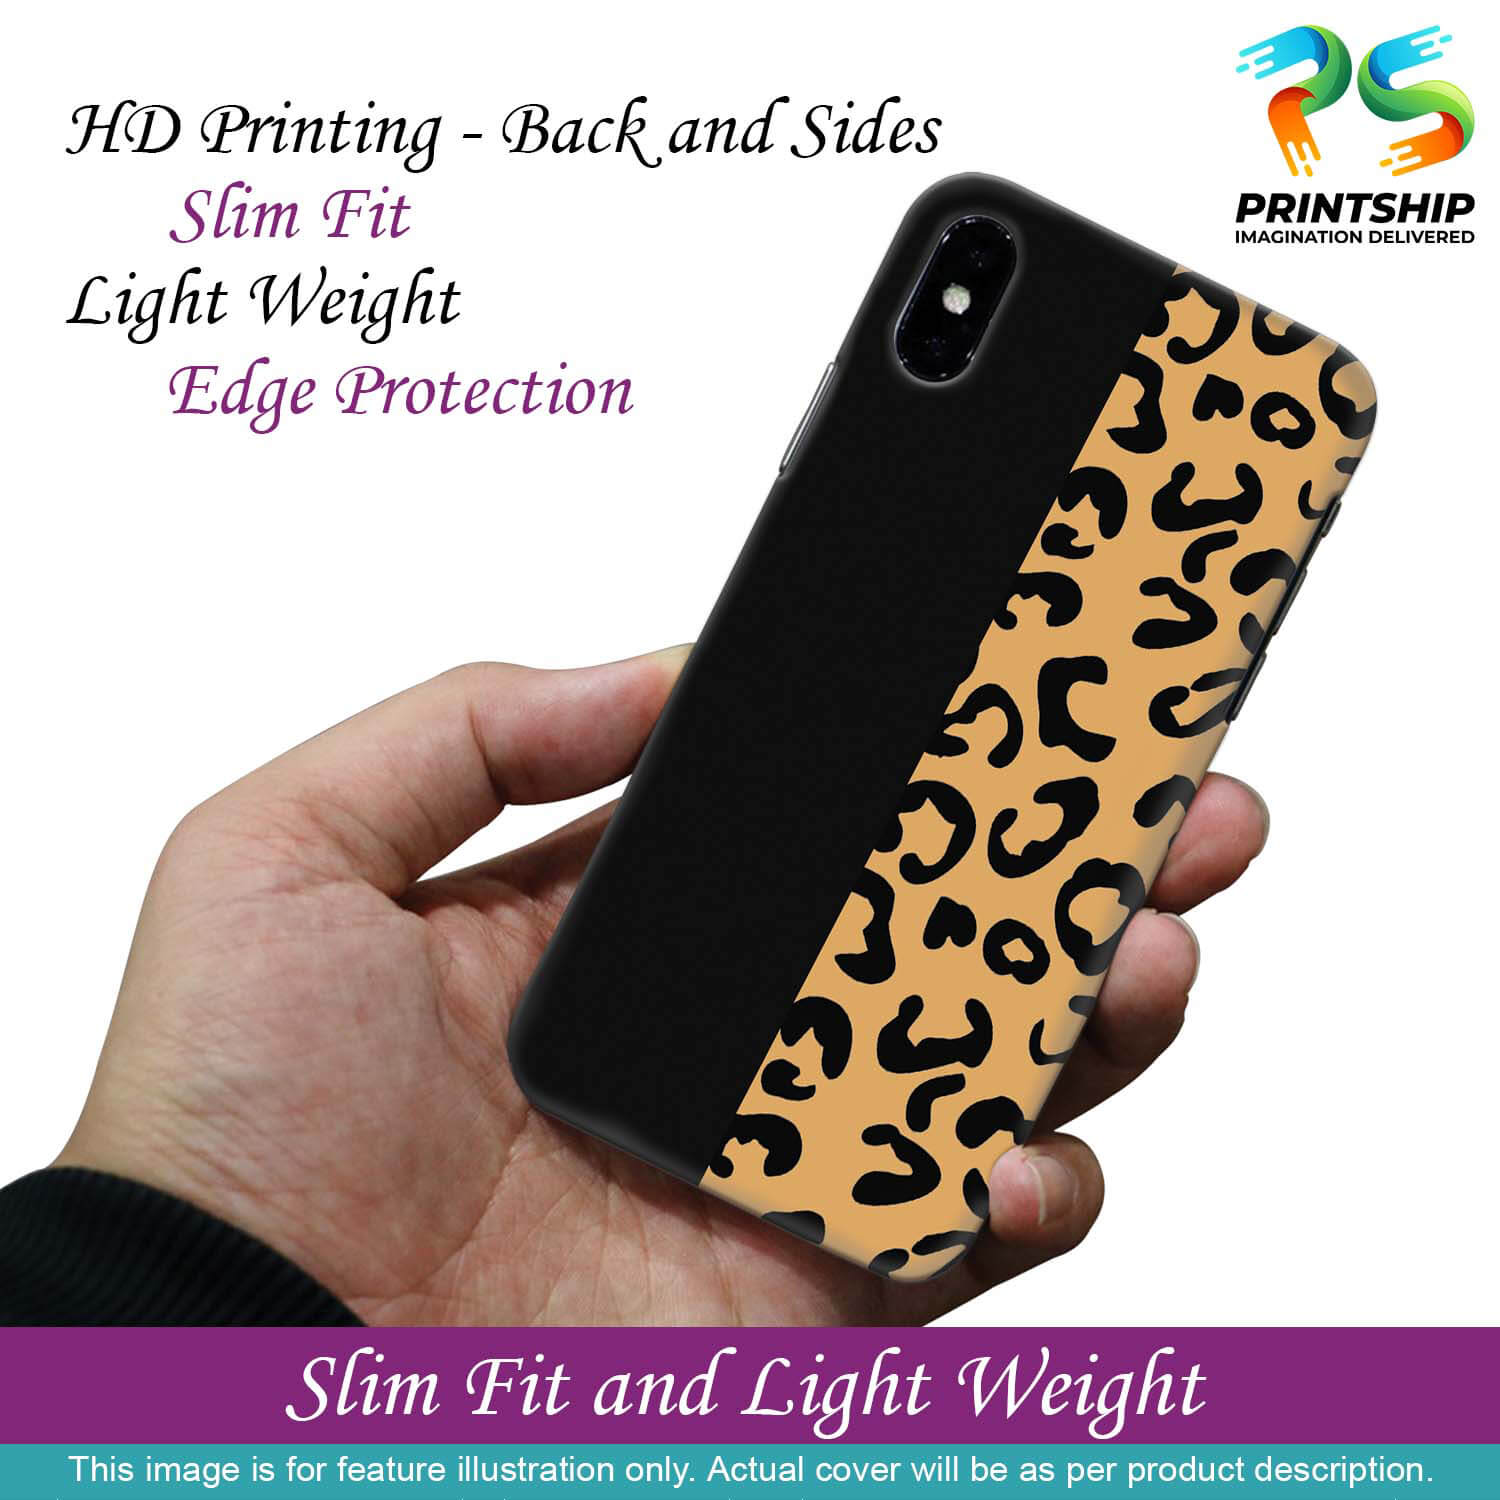 PS1315-Animal Black Pattern Back Cover for Oppo A52